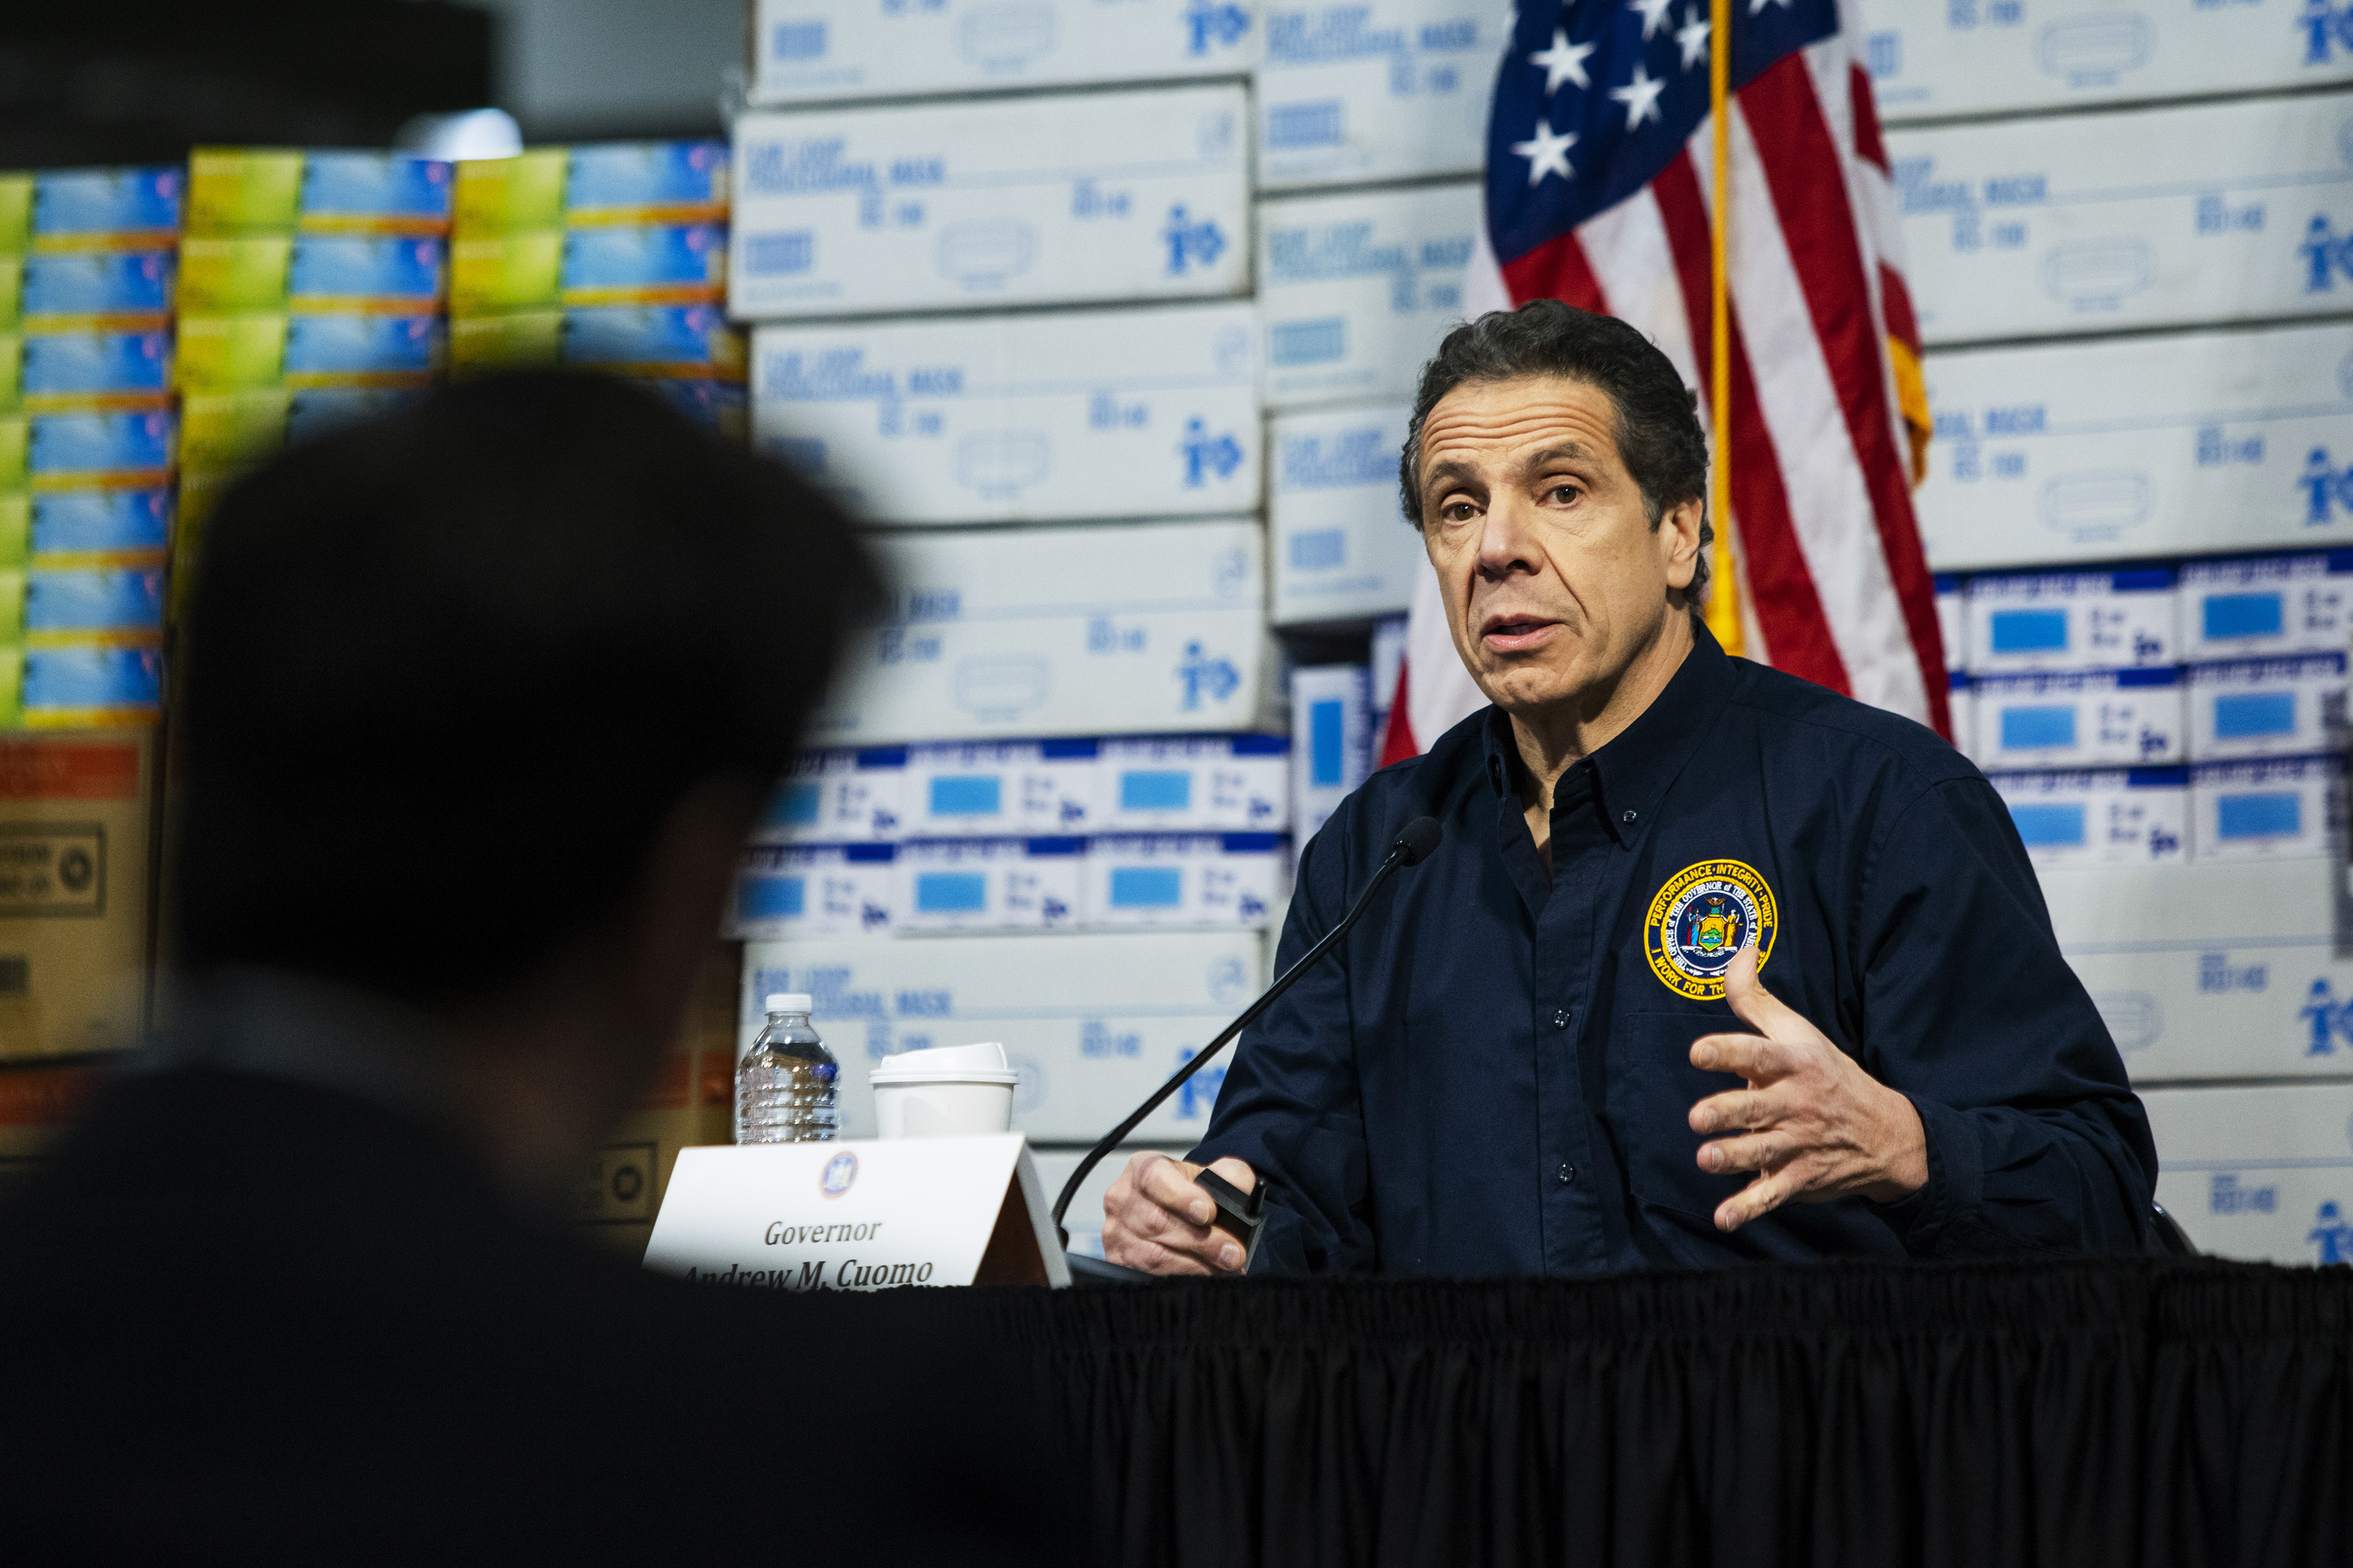 New York Gov. Andrew Cuomo speaks to the press at the Javits Center in New York City on March 24.